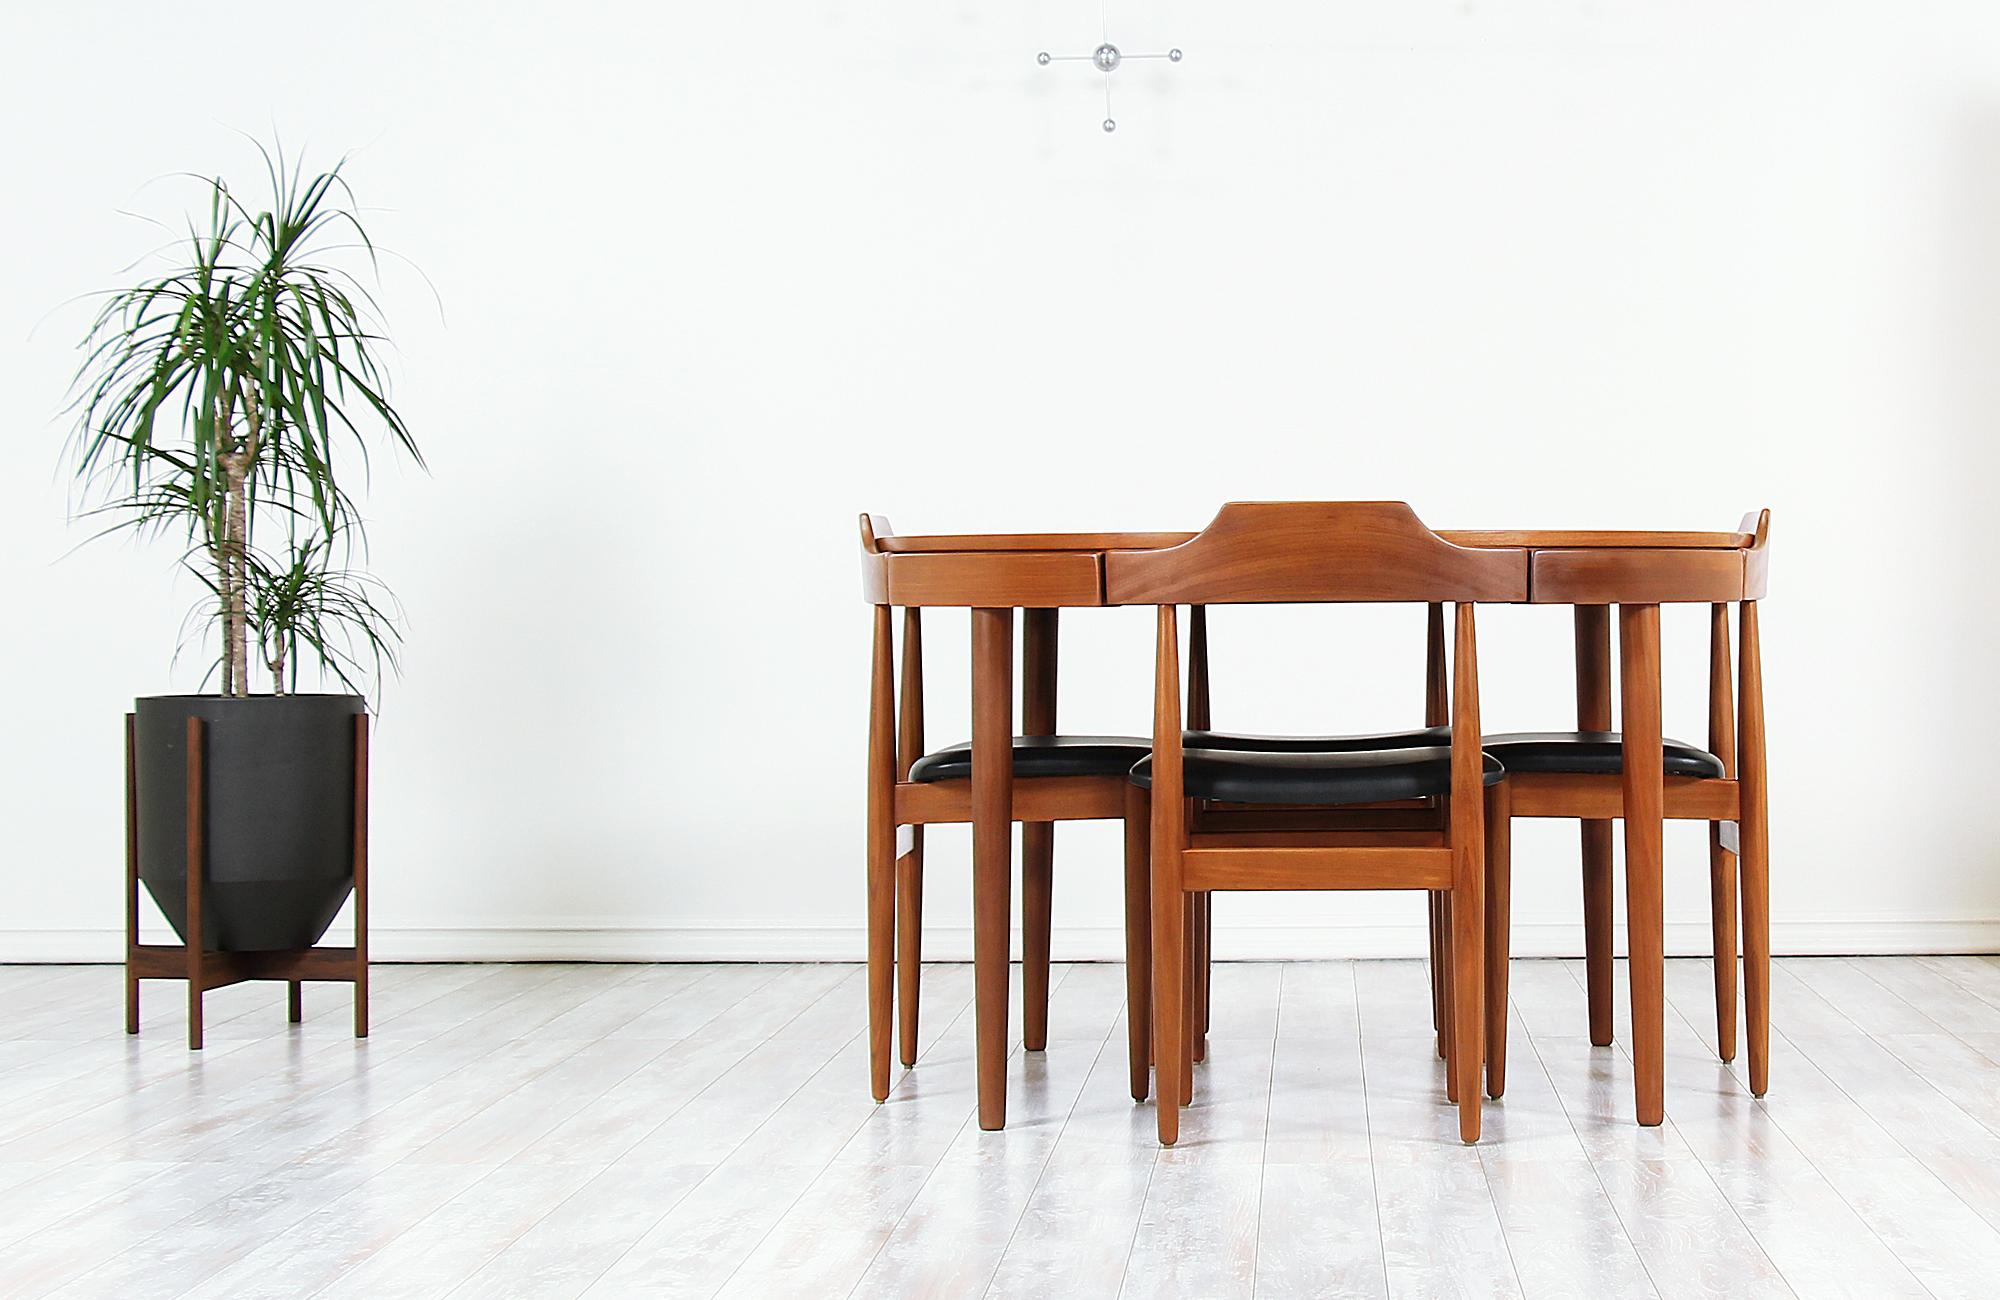 Rare dining set designed by Hans Olsen for Frem Rølje in Denmark, circa 1960s. This beautiful dining set features a sturdy teak wood frame with a butterfly-leaf extension to accommodate two more guests when needed. The extension leaf stores in the